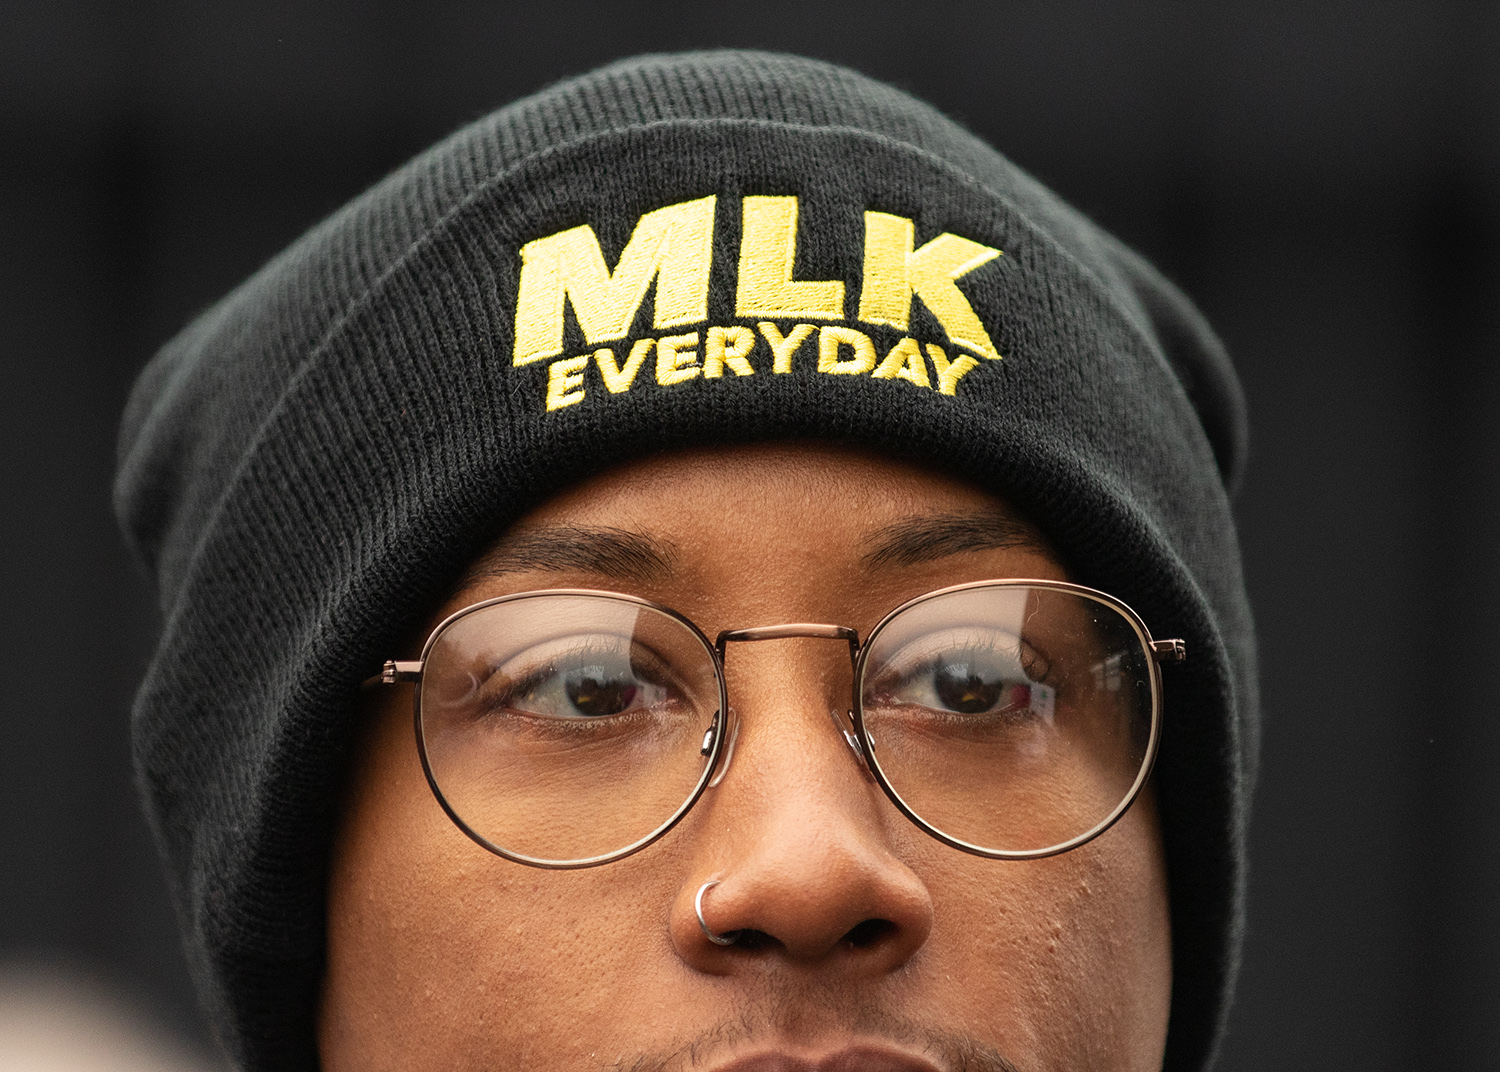  Tre’von Robinson, a University of Oregon student from Long Beach, Calif., listens as speakers address a crowd during a Martin Luther King Jr. rally outside Autzen Stadium Monday, Jan. 21, 2019, in Eugene. “Seeing all these people together is powerfu